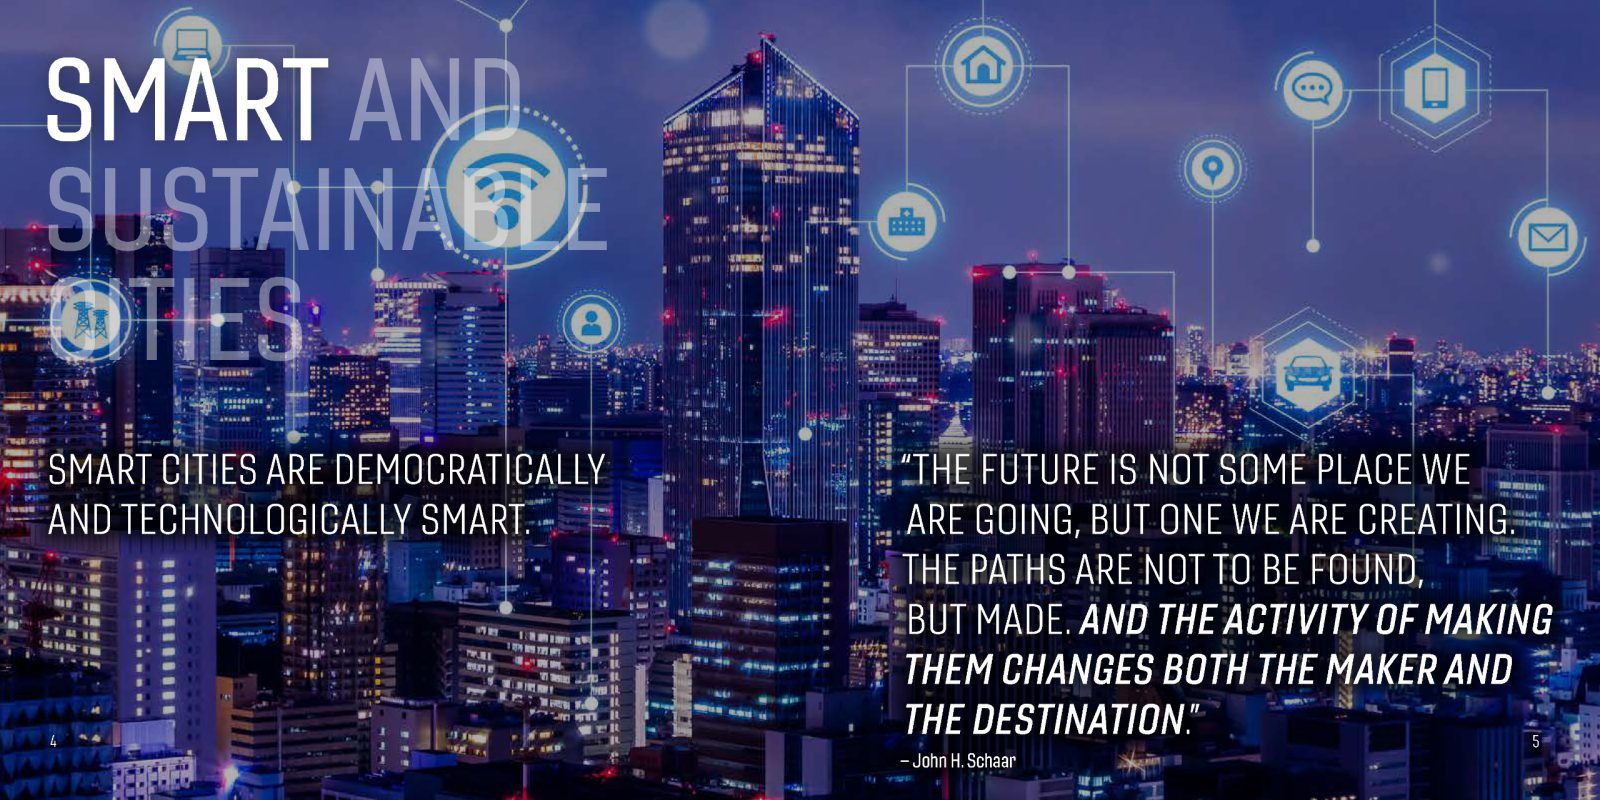 Smart Cities Are Democratically and Technologically Smart